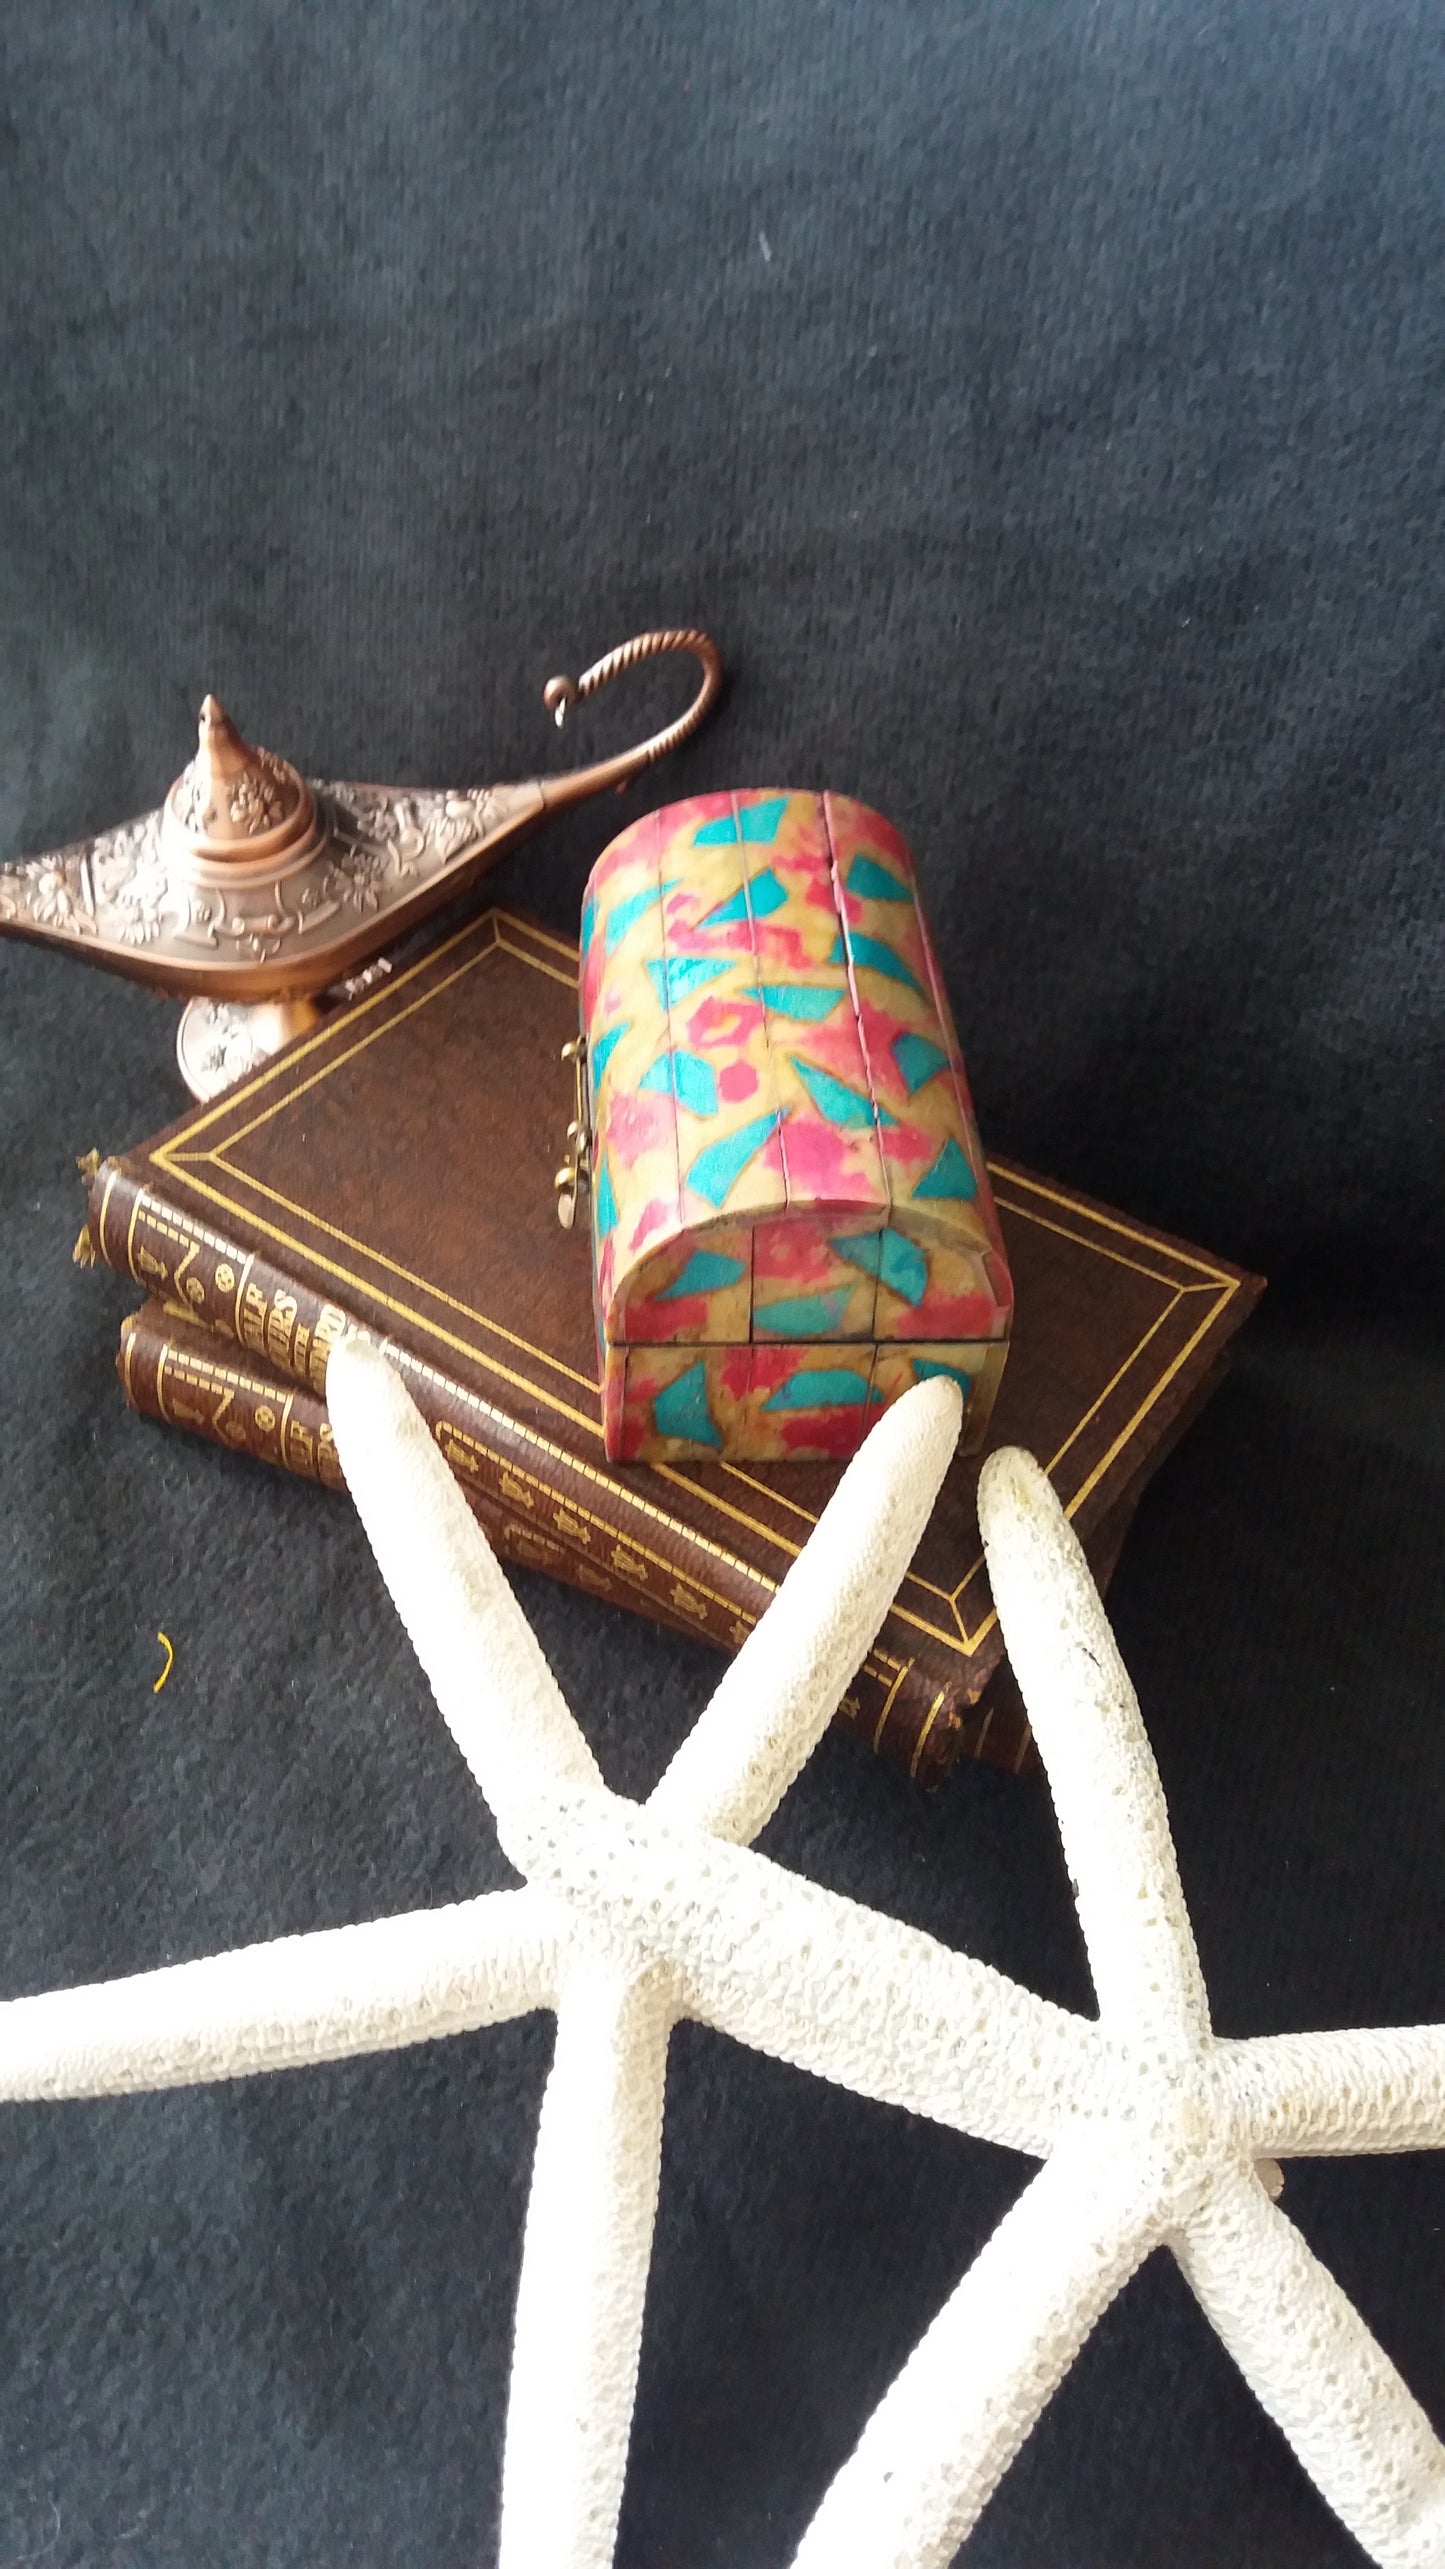 Bohemian style handcrafted treasure /chest box